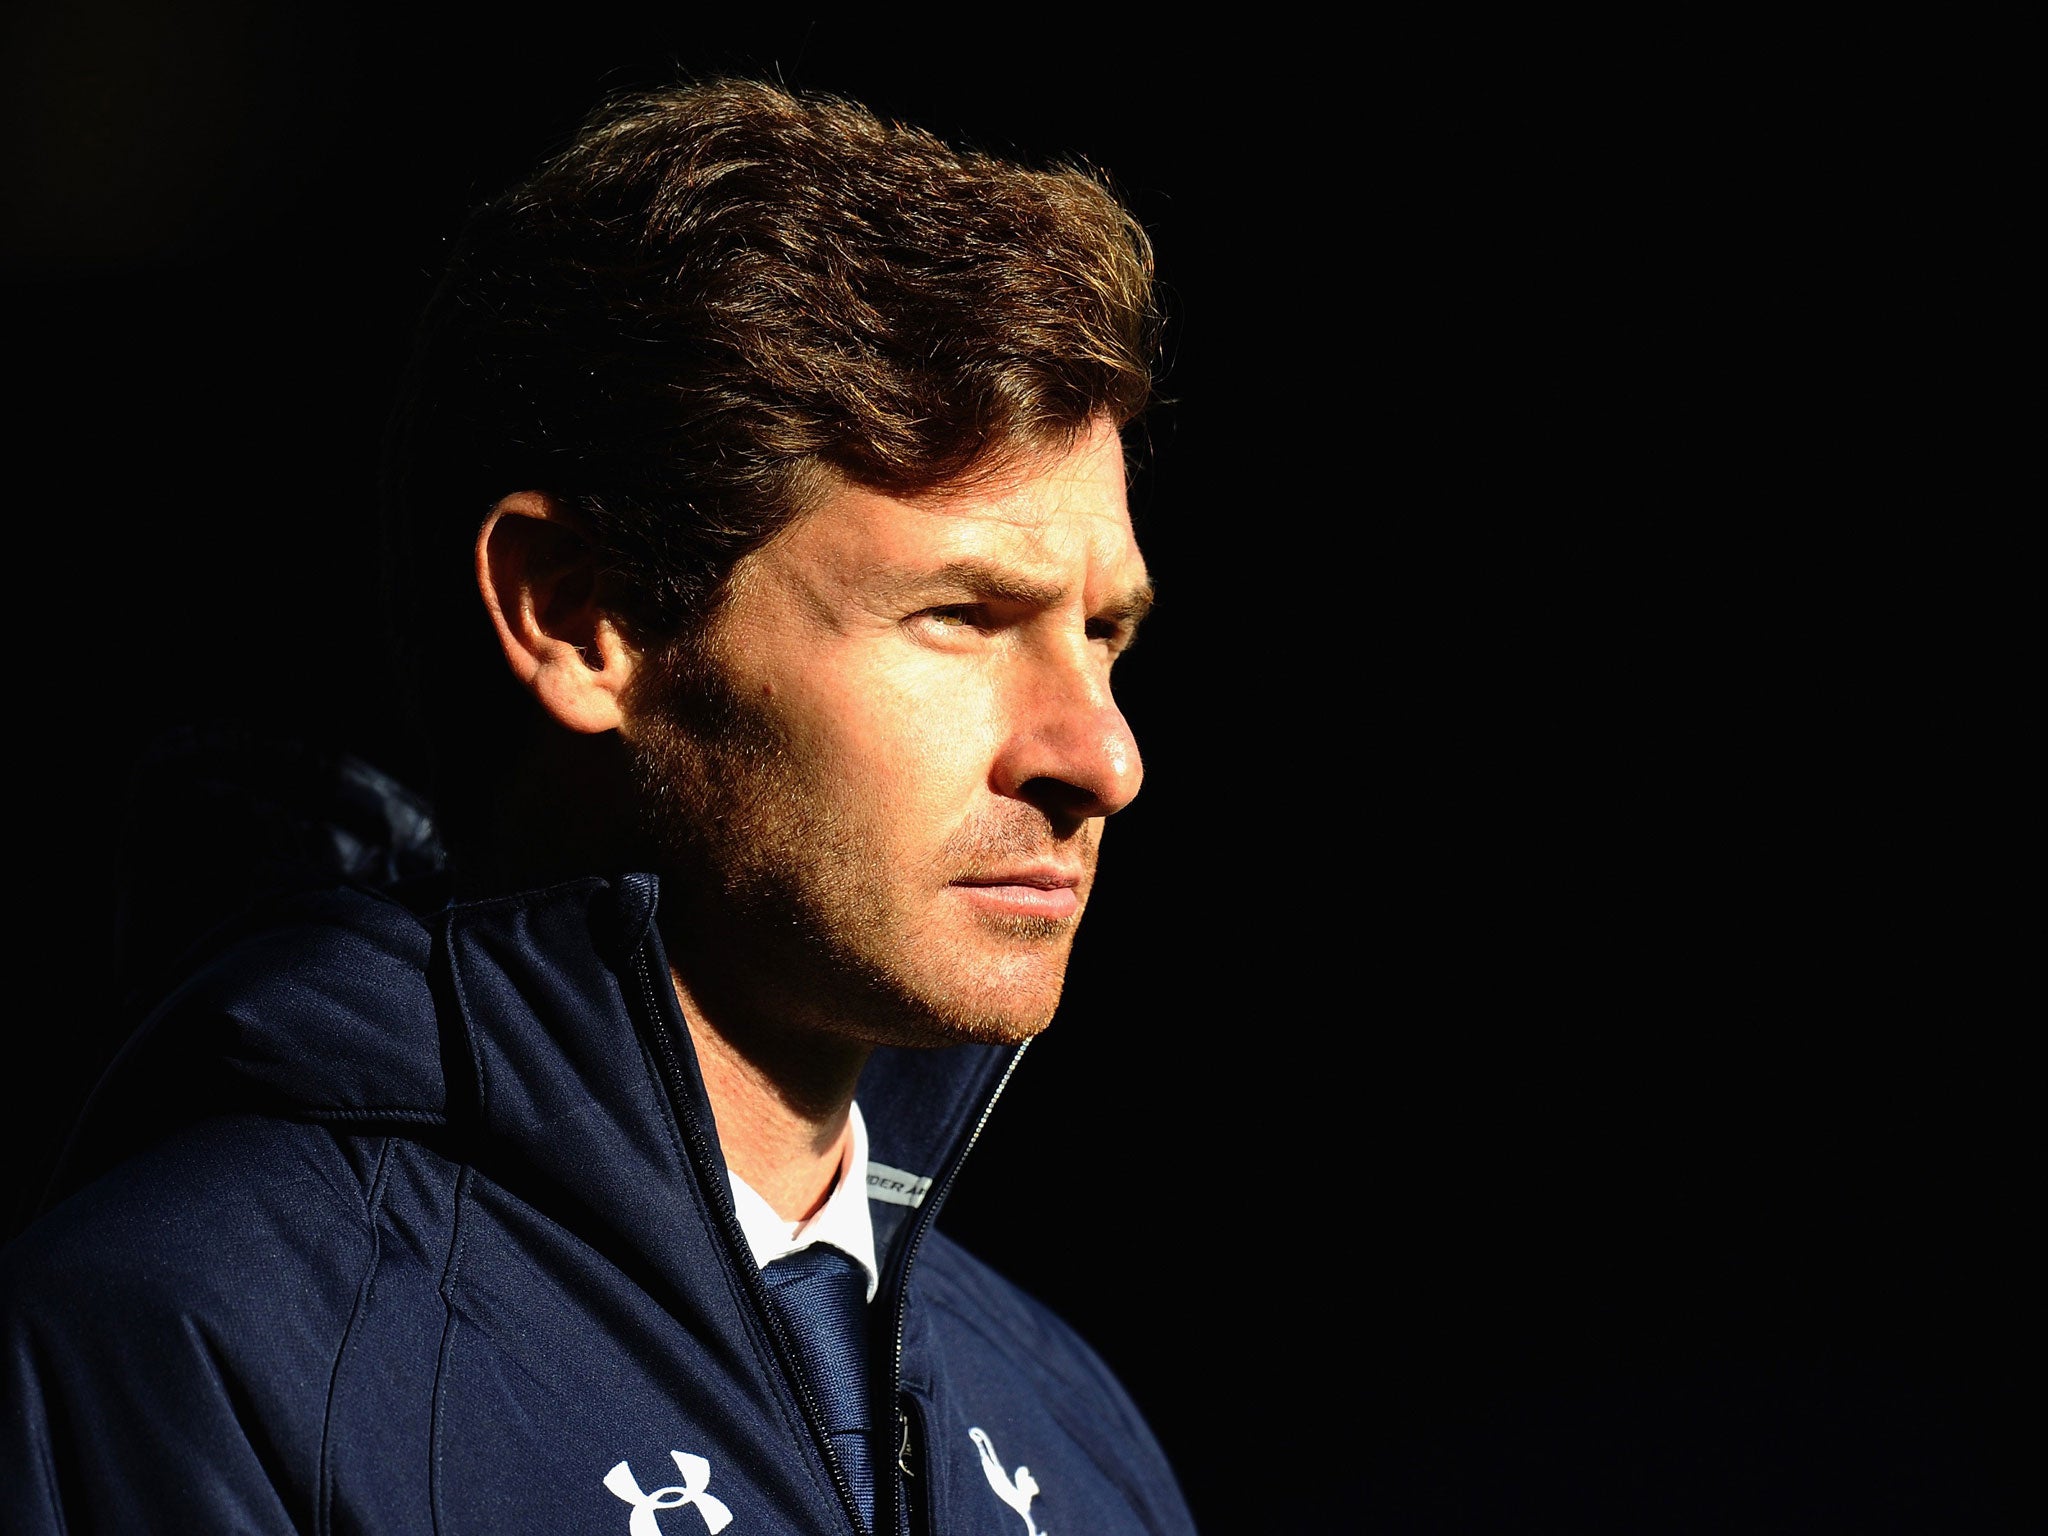 It's all work and no play for AVB